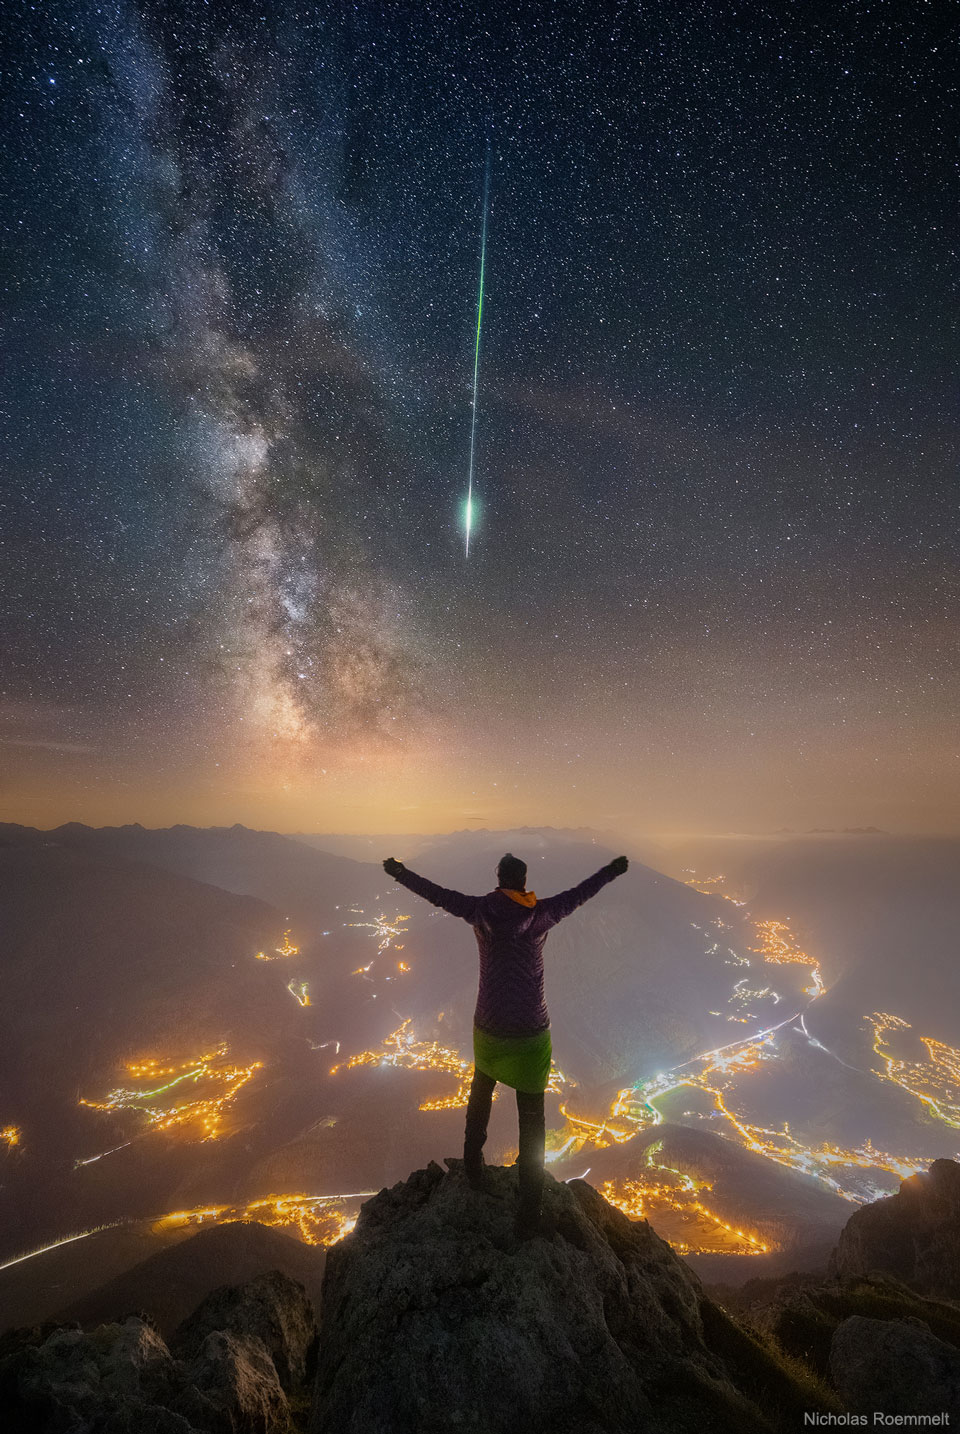 A person is seen facing away, standing on a peak. Other mountain peaks
surround them. City lights are seen in towns and along roads below. Stars
in the night sky are above. The band of the Milky Way galaxy slants down
from the upper left. A bright green meteor streak slants down from above.
Więcej szczegółowych informacji w opisie poniżej.